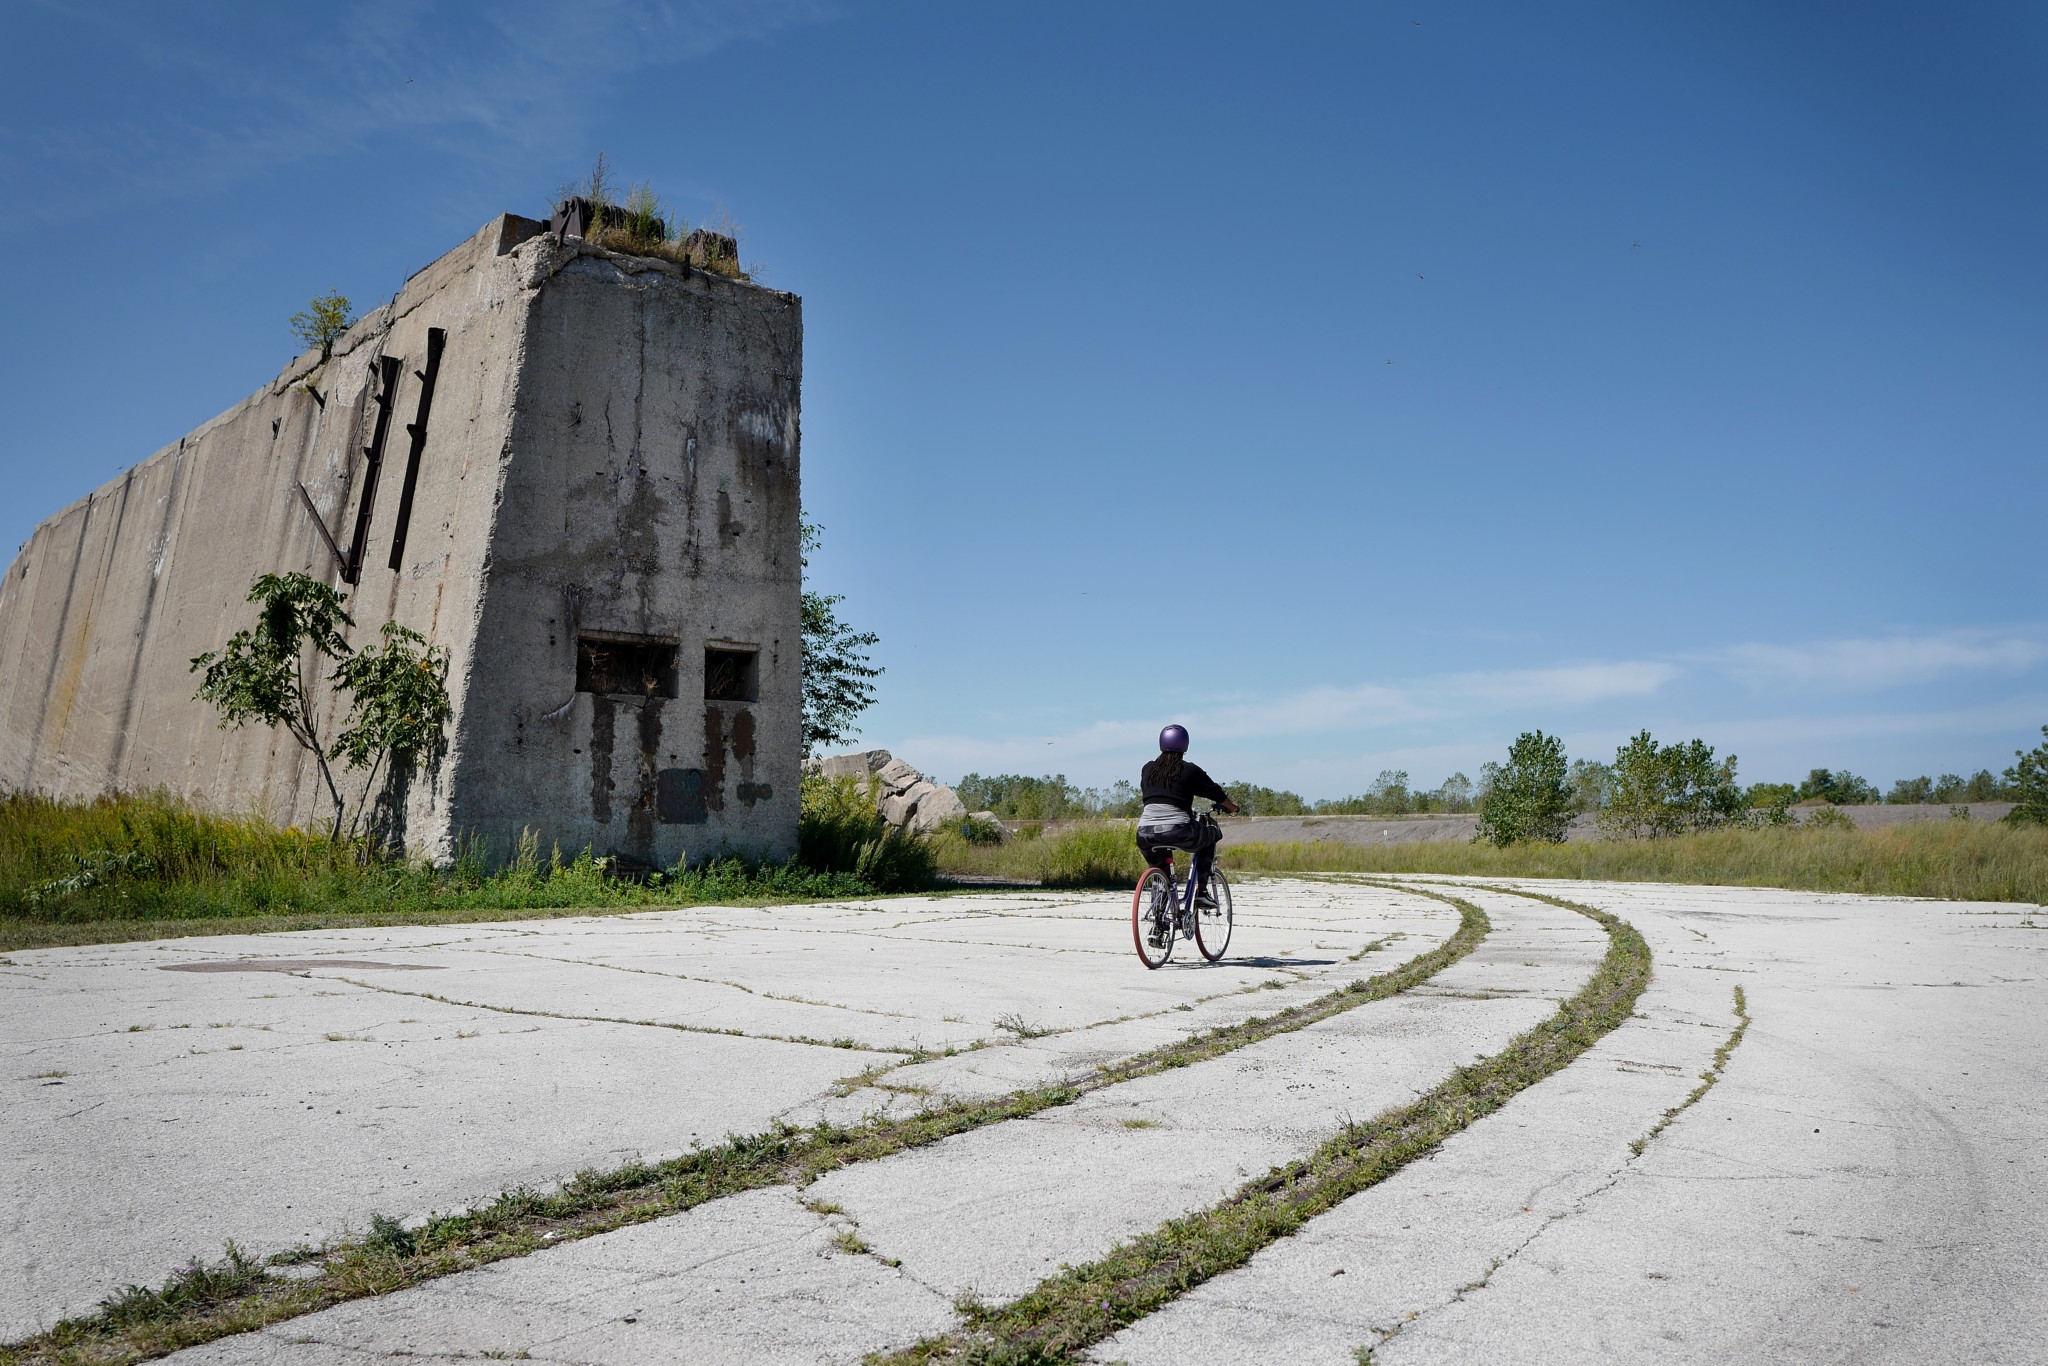 A large abandoned concrete structure sits beside cracked concrete paths on which a bicyclist rides towards a blue horizon, with tufts of grass and shrubs